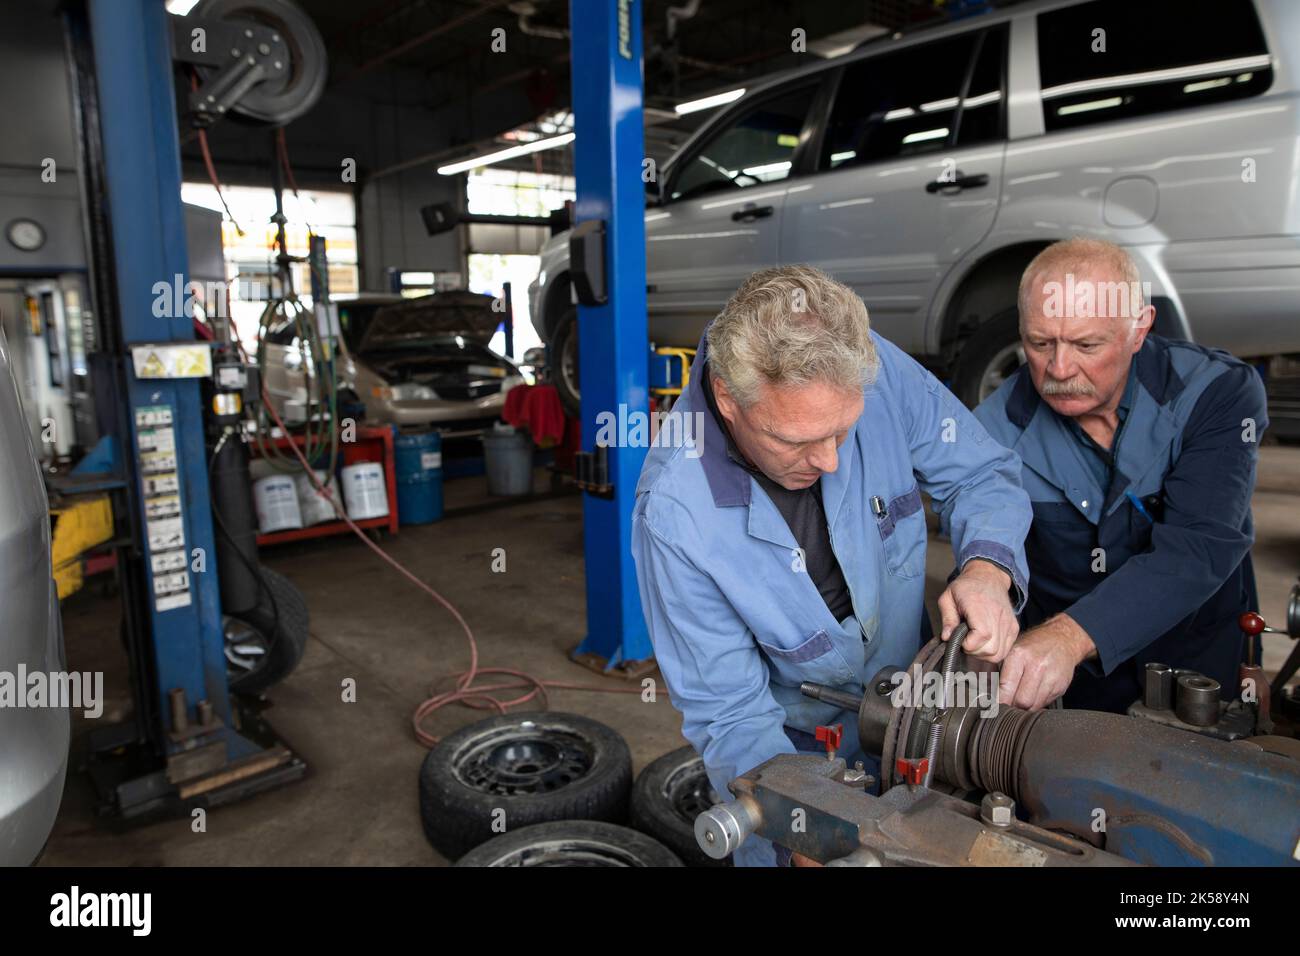 Two mechanics using machinery in automobile workshop Stock Photo